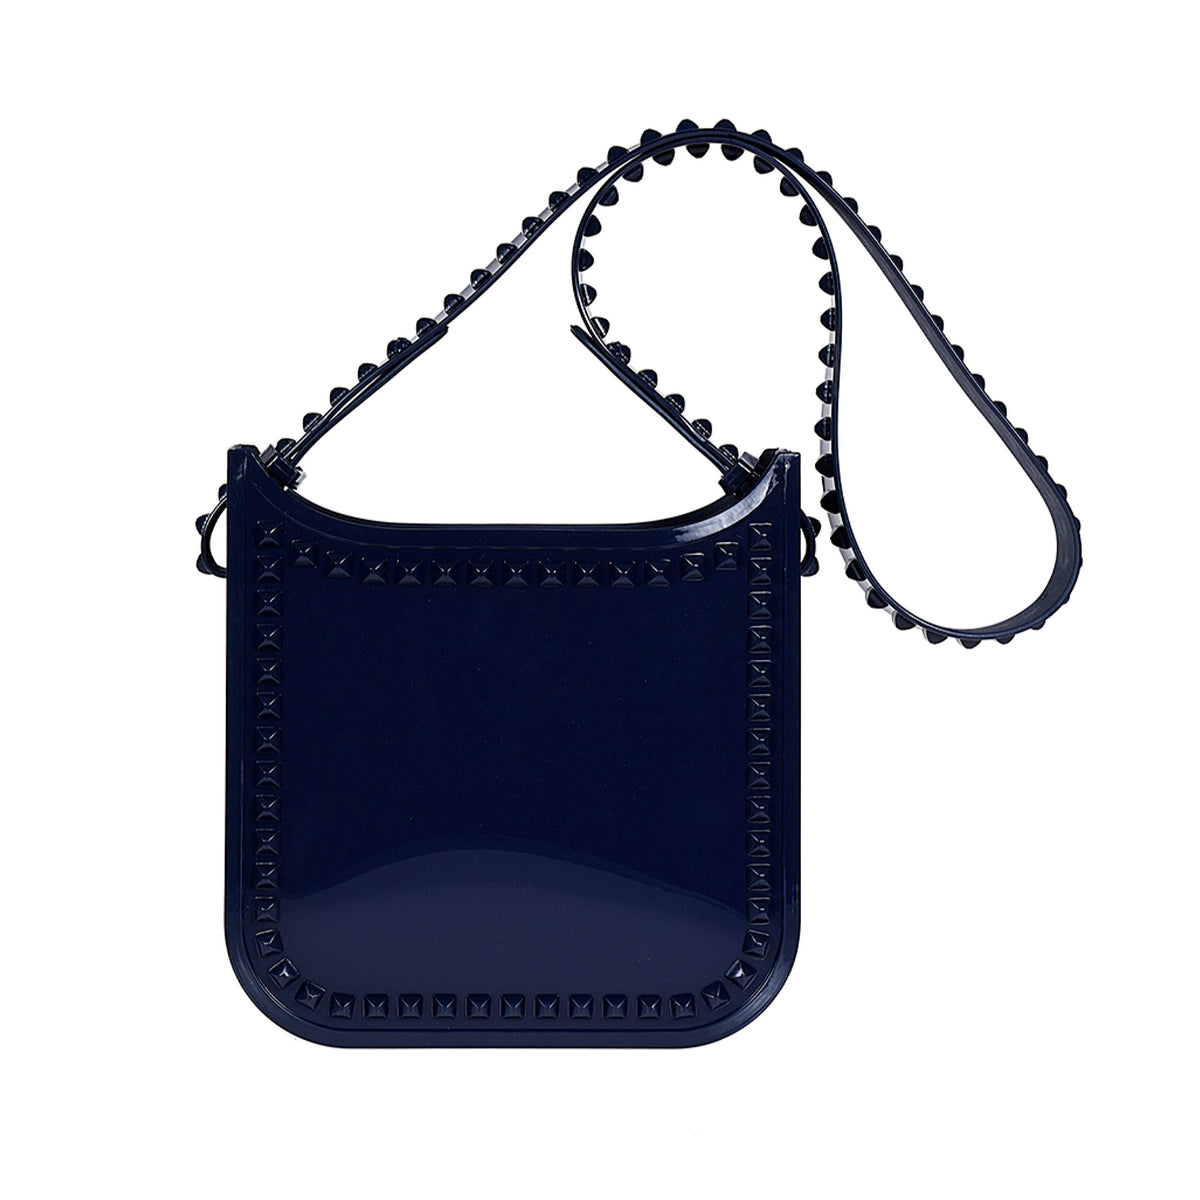 Toni navy blue jelly bags with studs perfect for the beach